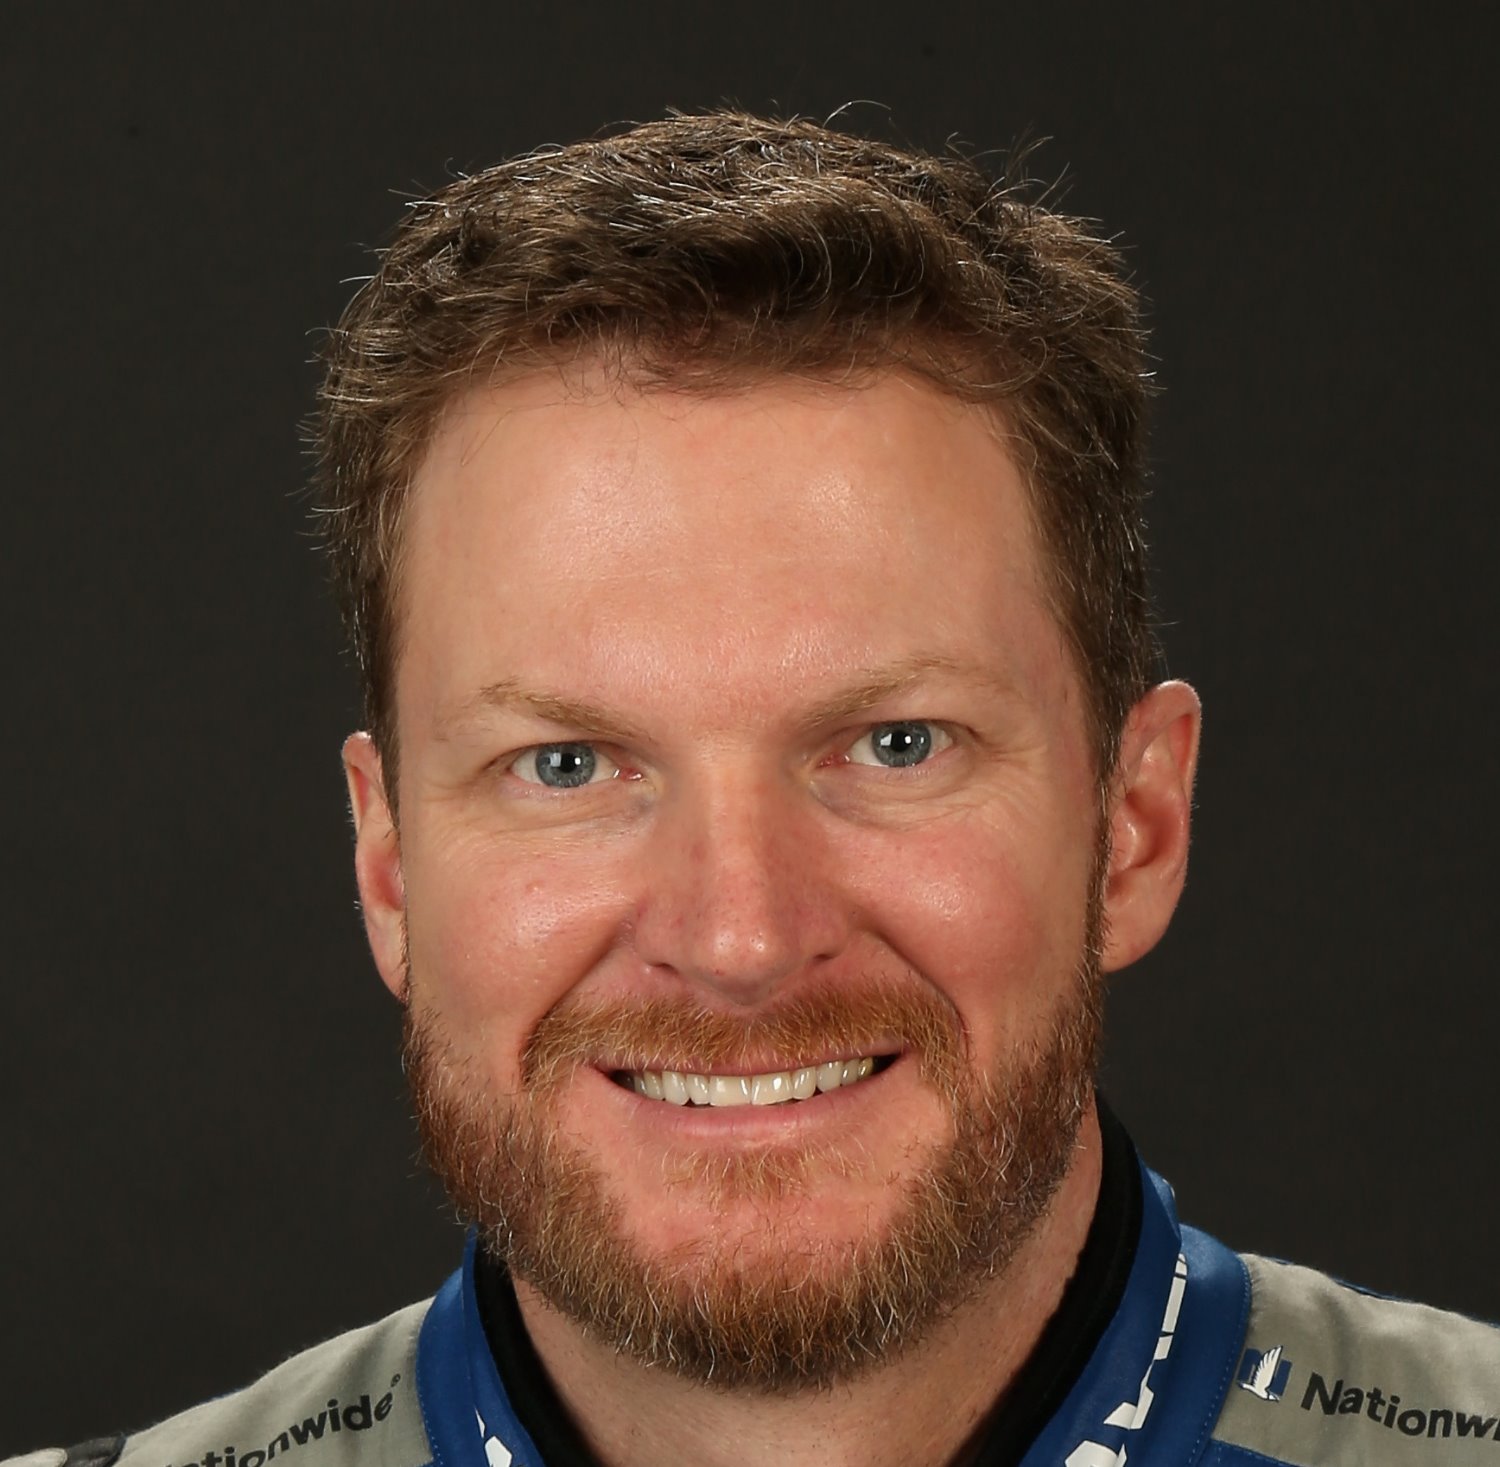 We suspect Dale Jr. will race until he gets another concussion, which would probably end his career